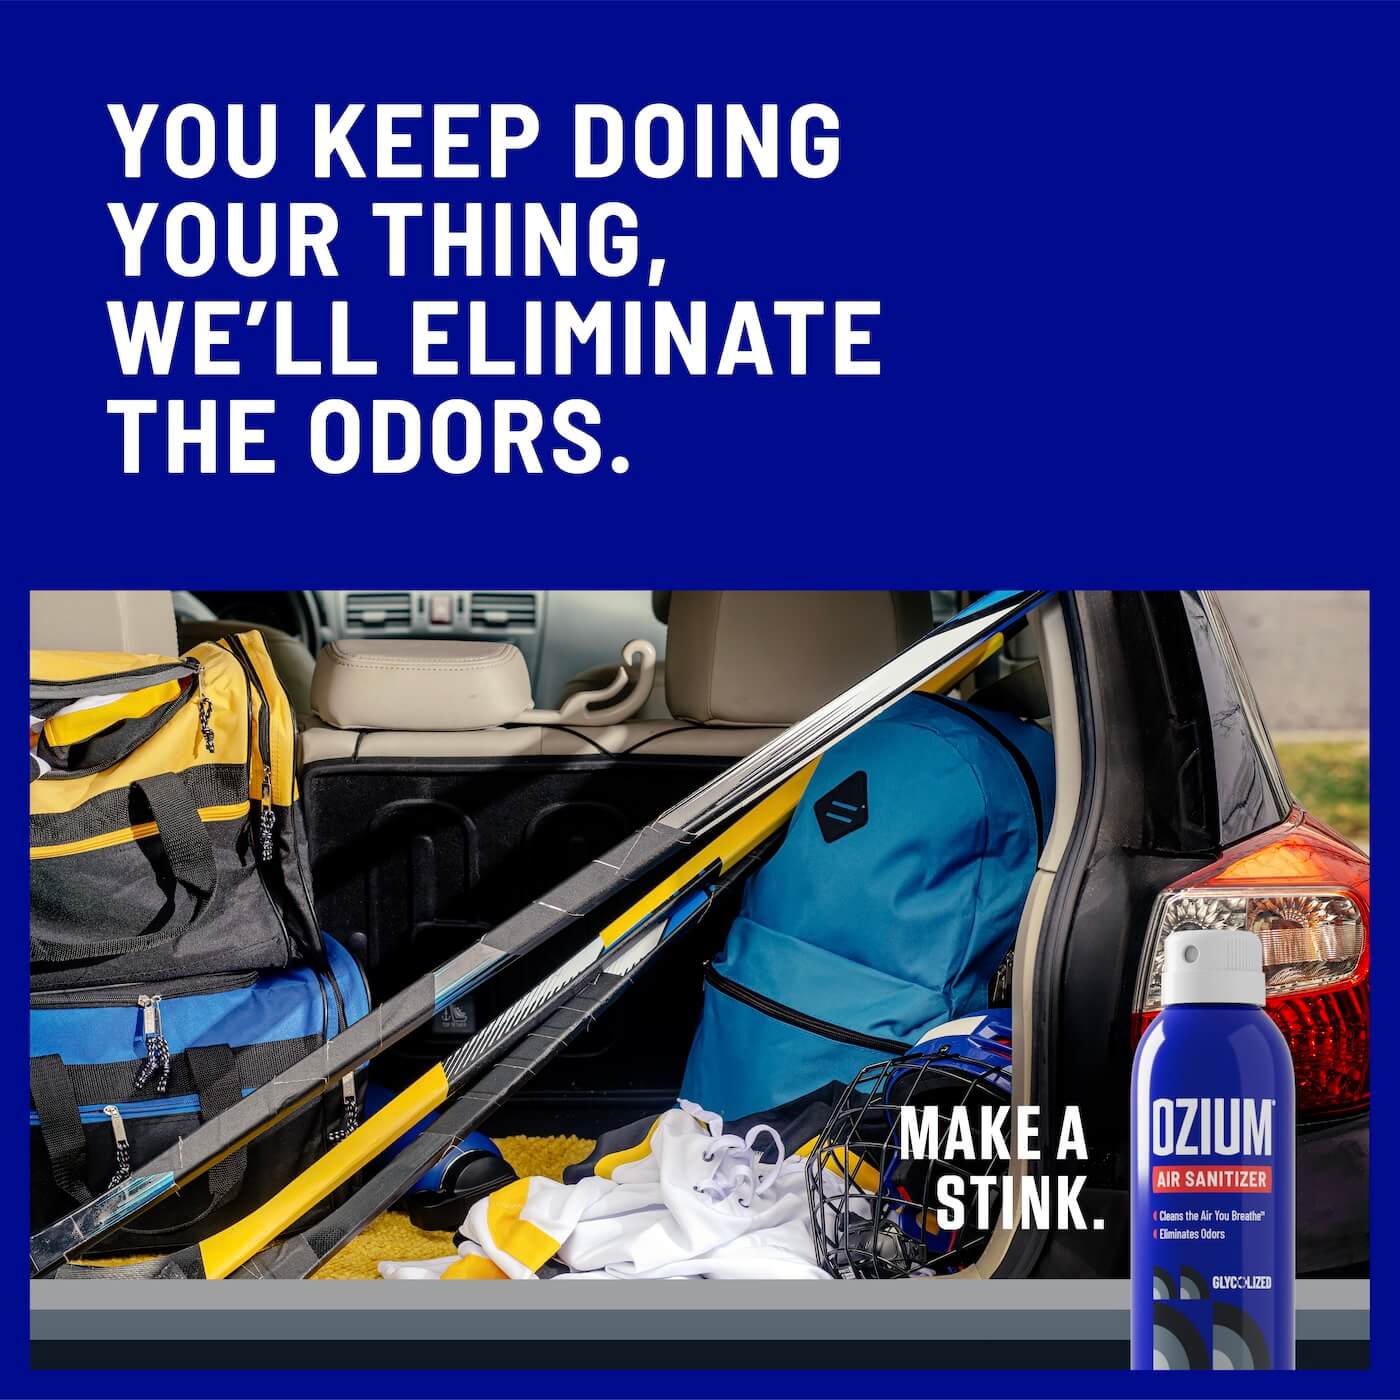 You keep doing your thing, we'll eliminate the odors. Image of Ozium and a car trunk with hockey sticks and a backpack.